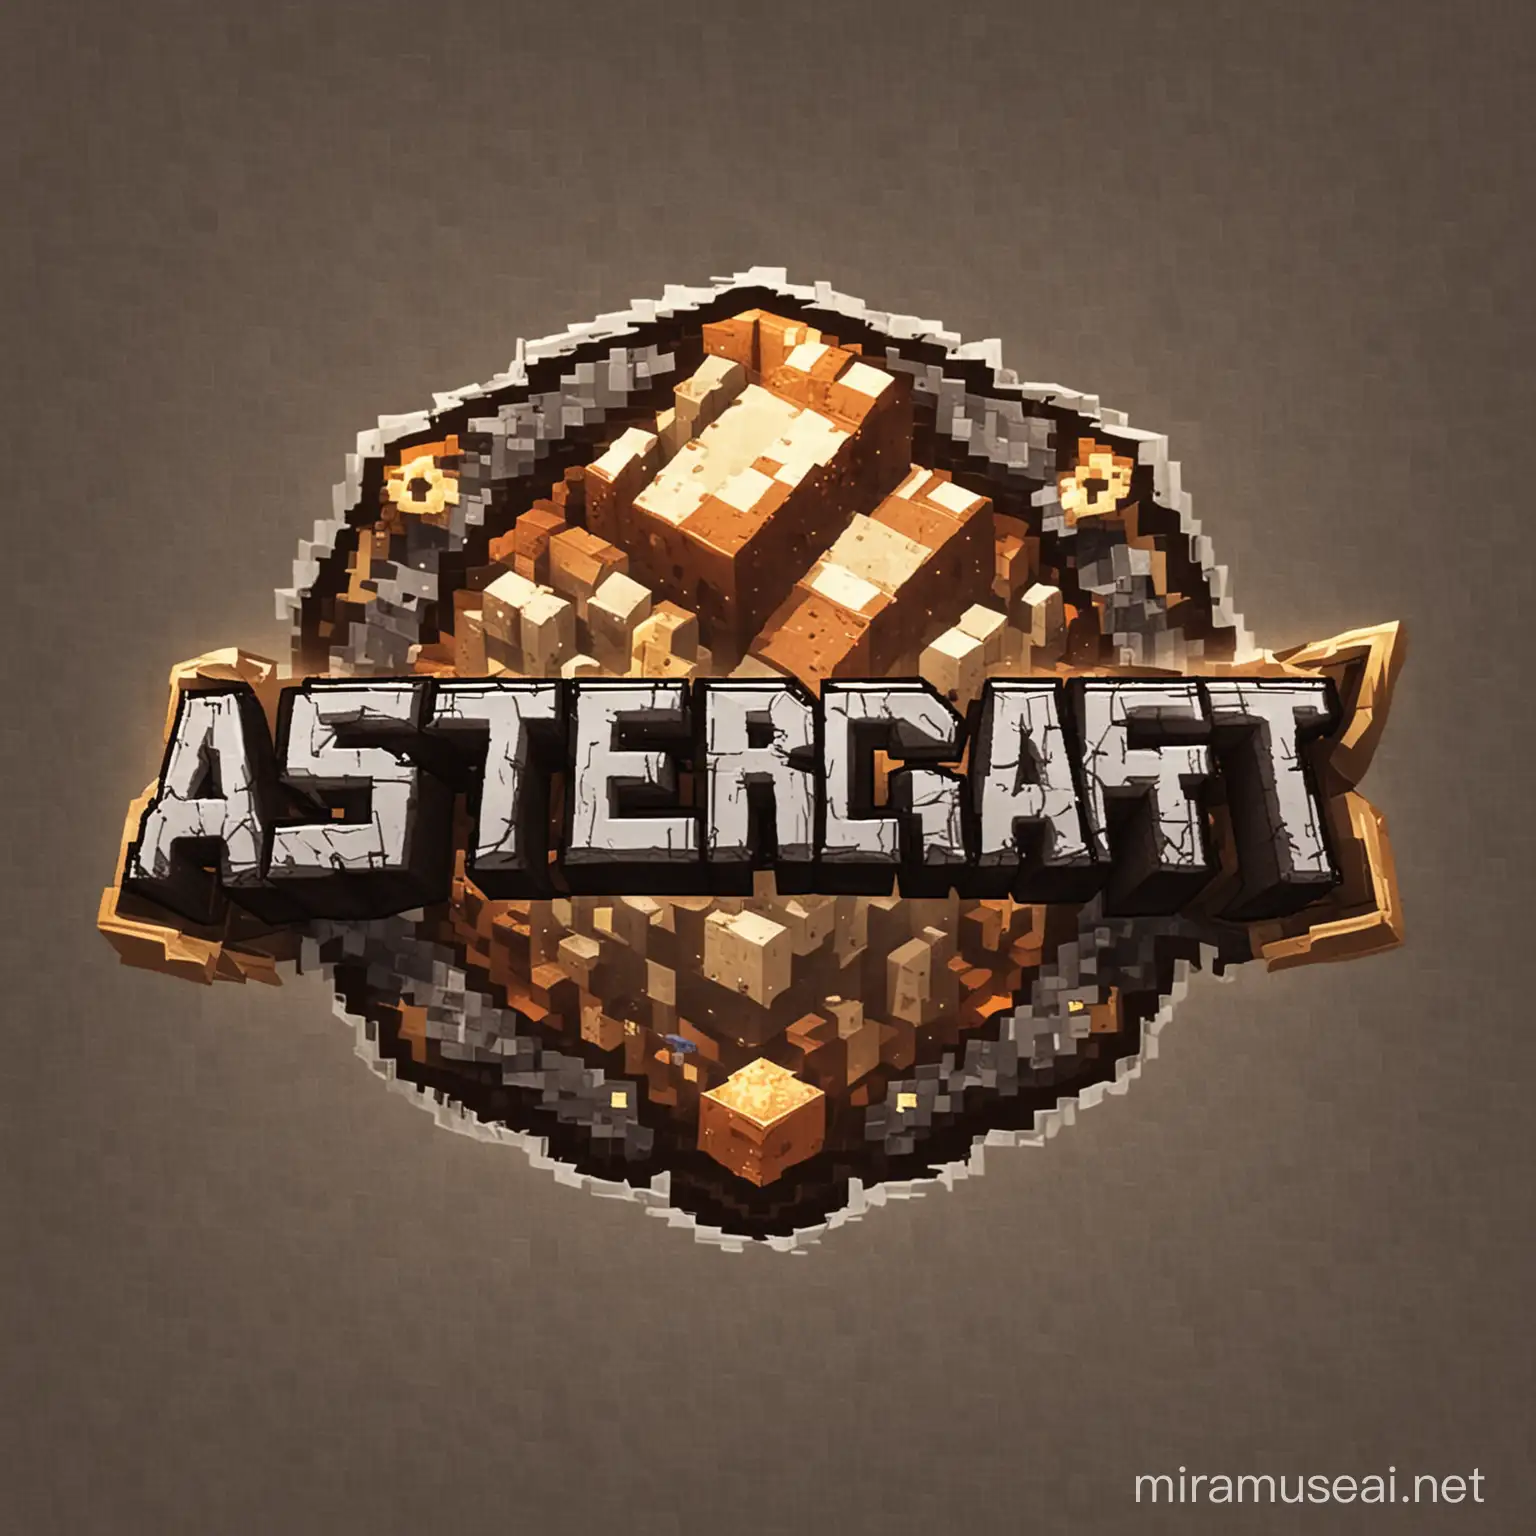 minecraft server icon. The server name is AsterelCraft